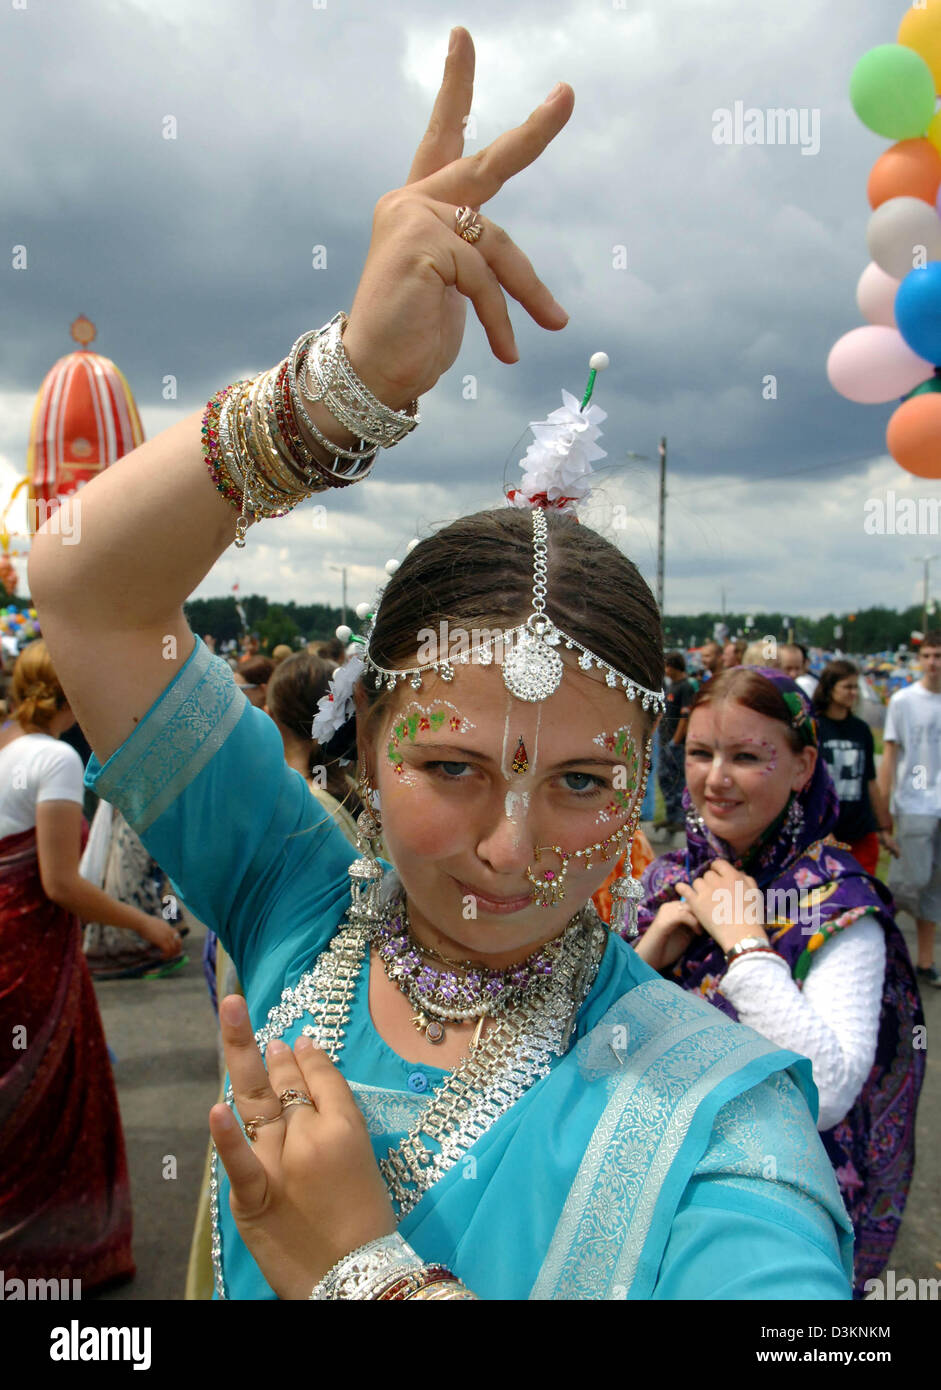 (dpa) - Indian Radha Madhava, a member of the Hare Krishna movement, dances on the premises of the openair music festival 'Przystanek Woodstock 2005' (Train Stop Woodstock 2005) in the border town of  Kostrzyn, Poland, Thursday, 08 August 2005. In the  city, located 80 kilometres from Berlin, Poland's biggest music spectacle takes place from 05 Agust to 06 August 2005. The festival Stock Photo